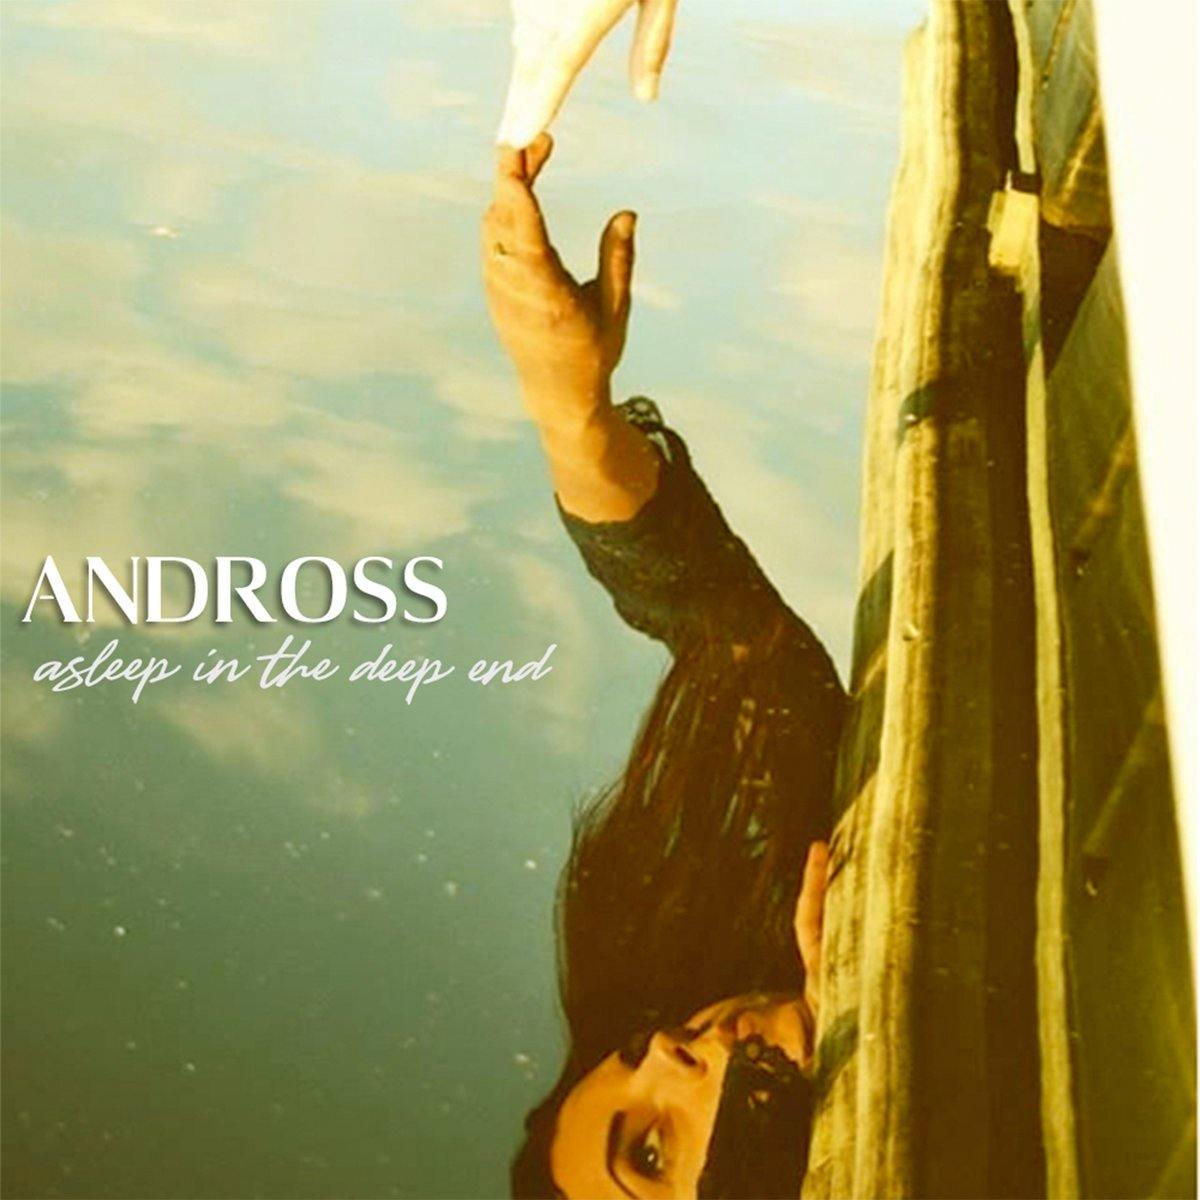 Buy – Andross "Asleep In The Deep End" CD – Band & Music Merch – Cold Cuts Merch